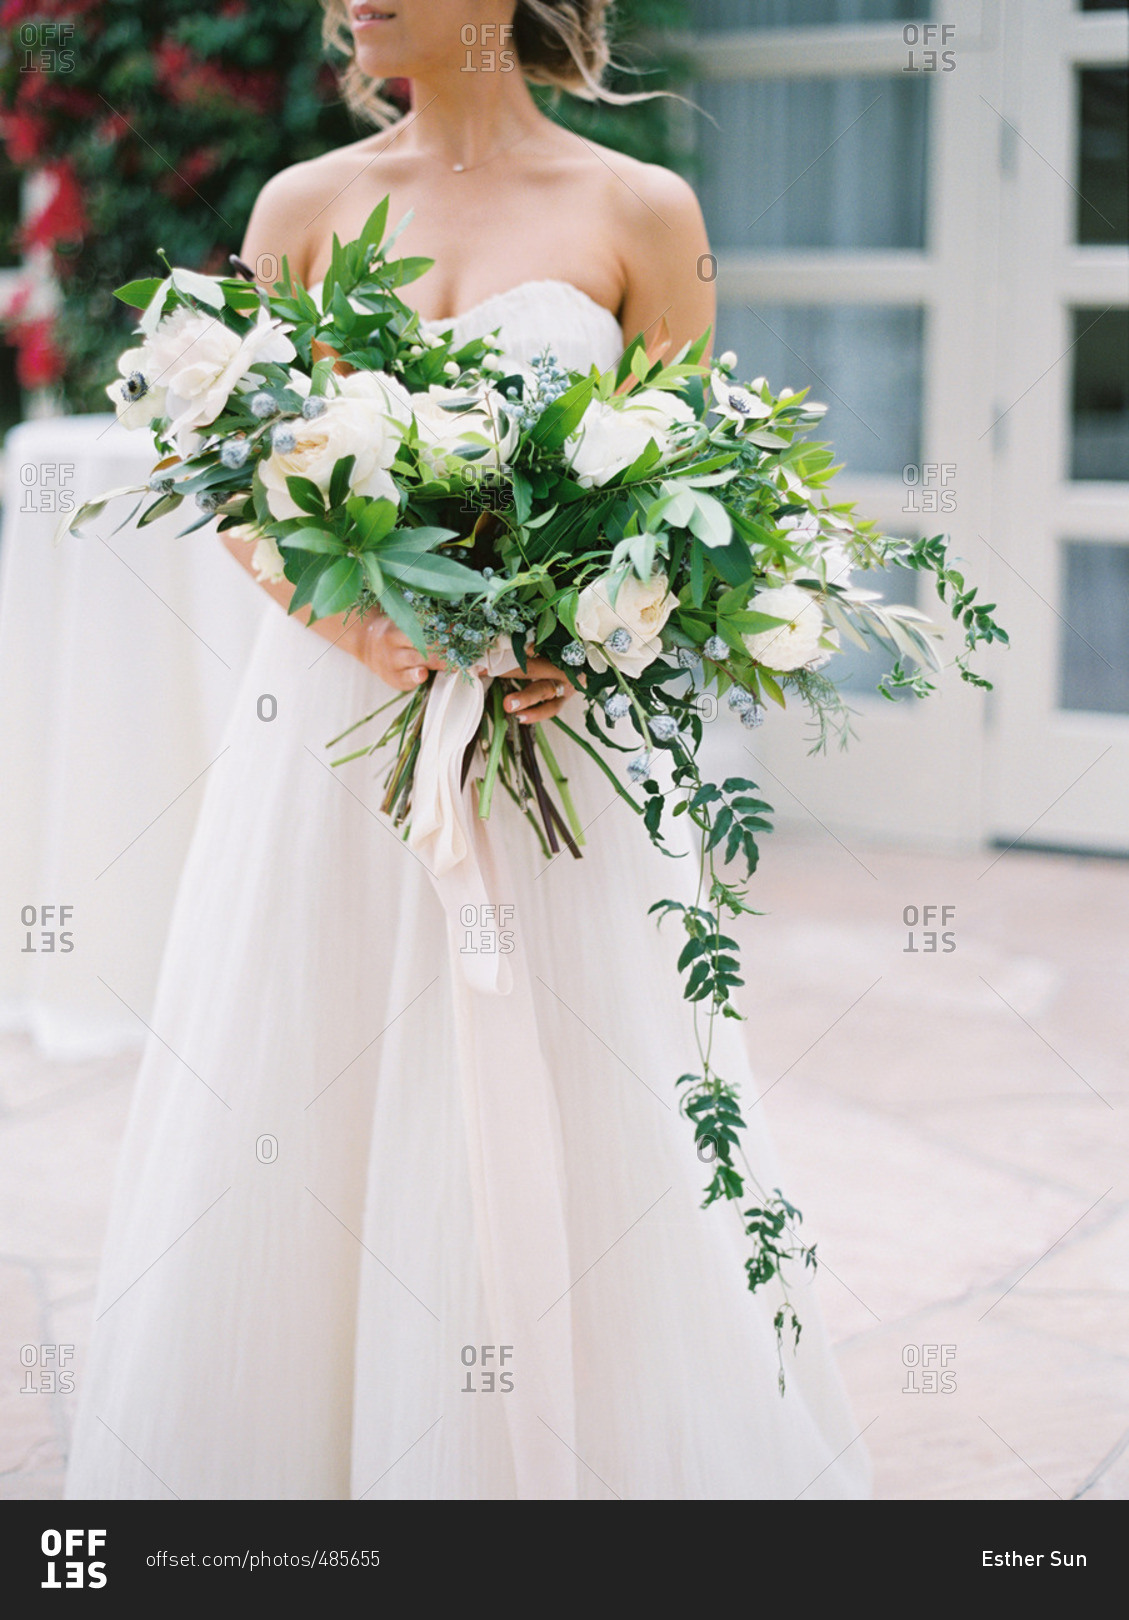 Neck down portrait of seated bride with white and green floral bouquet